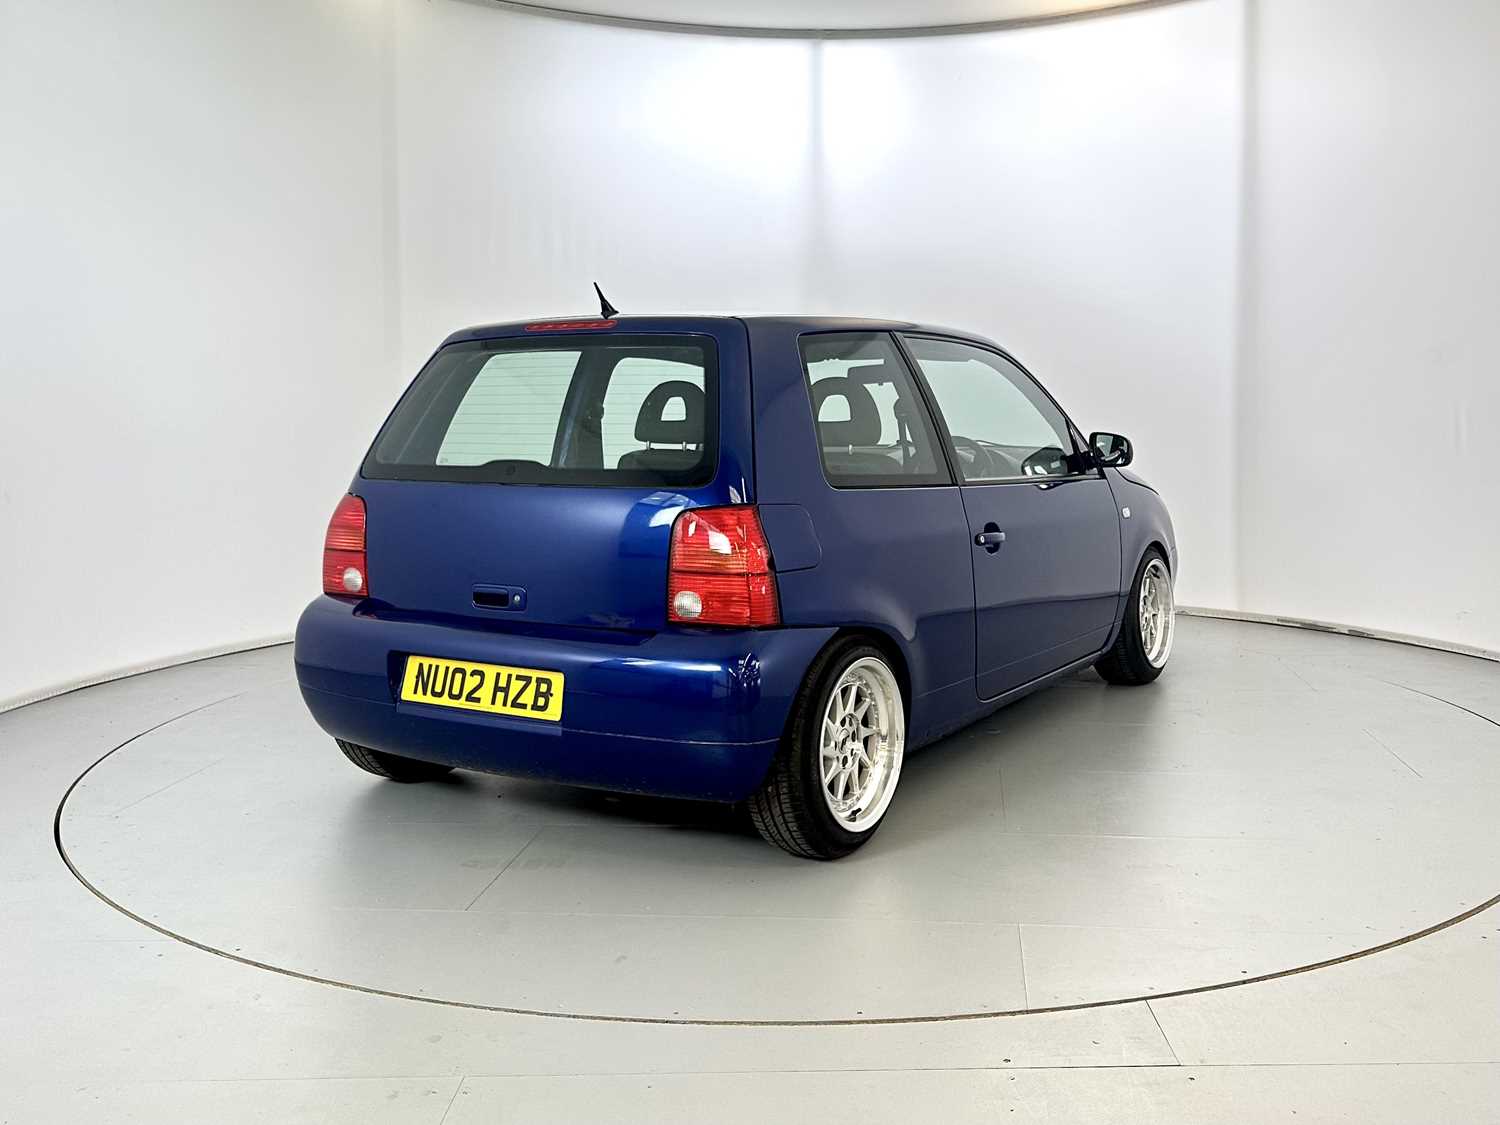 2002 Volkswagen Lupo - Image 9 of 28